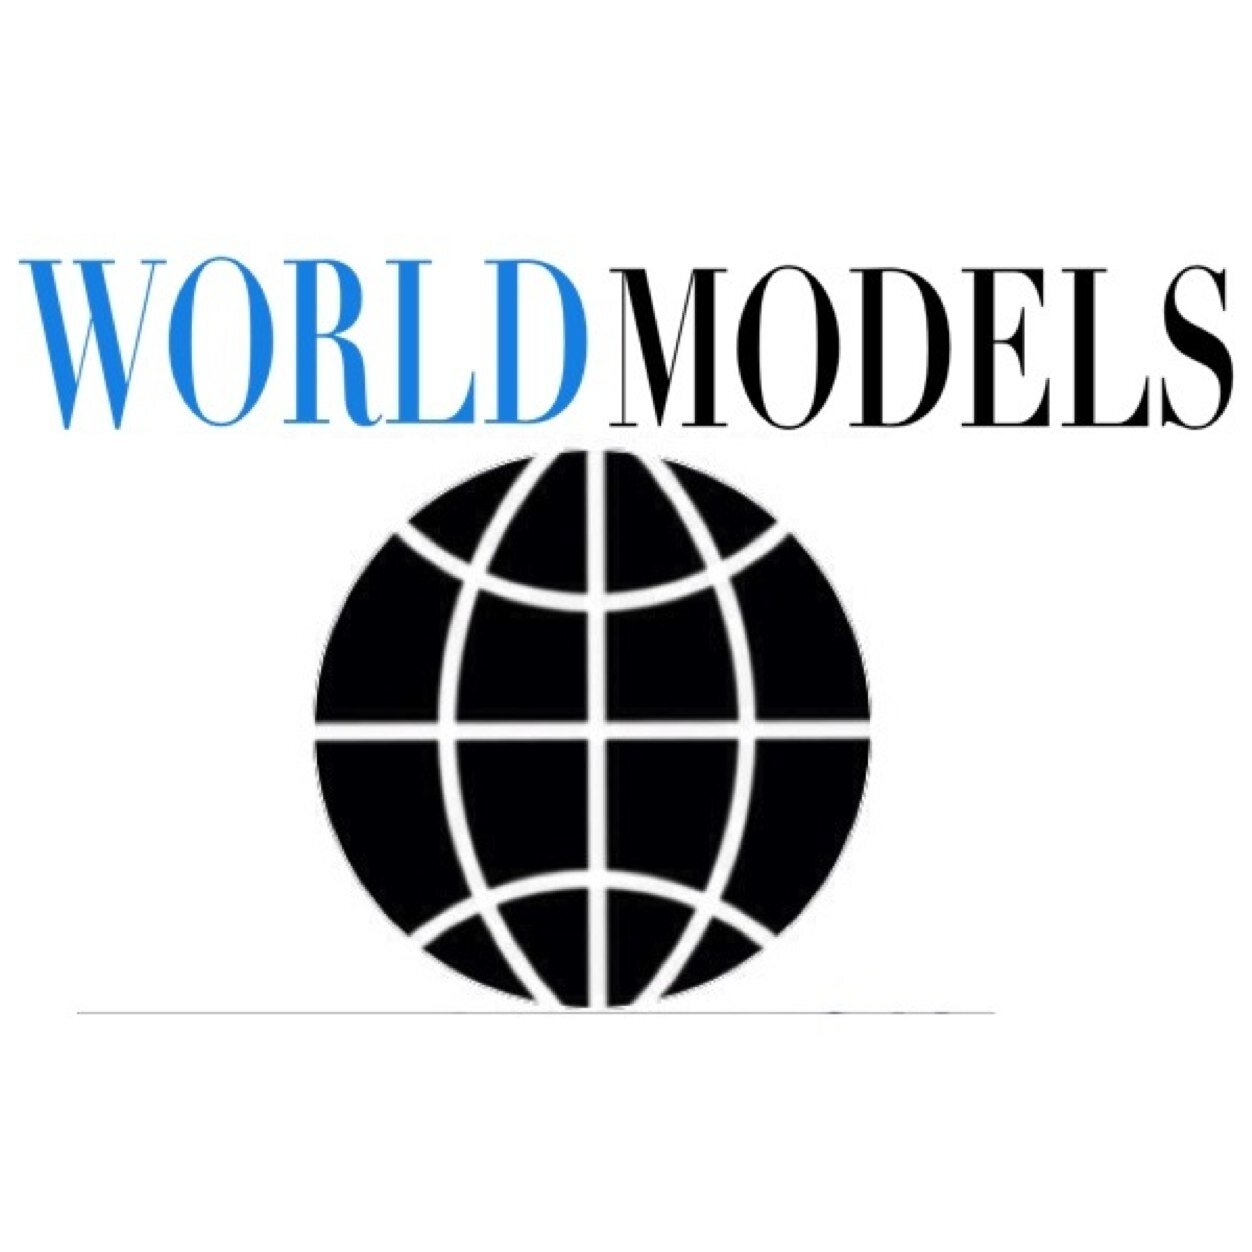 World Models is an expert global scouting & placement service for on stay agencies, mother agencies & models.